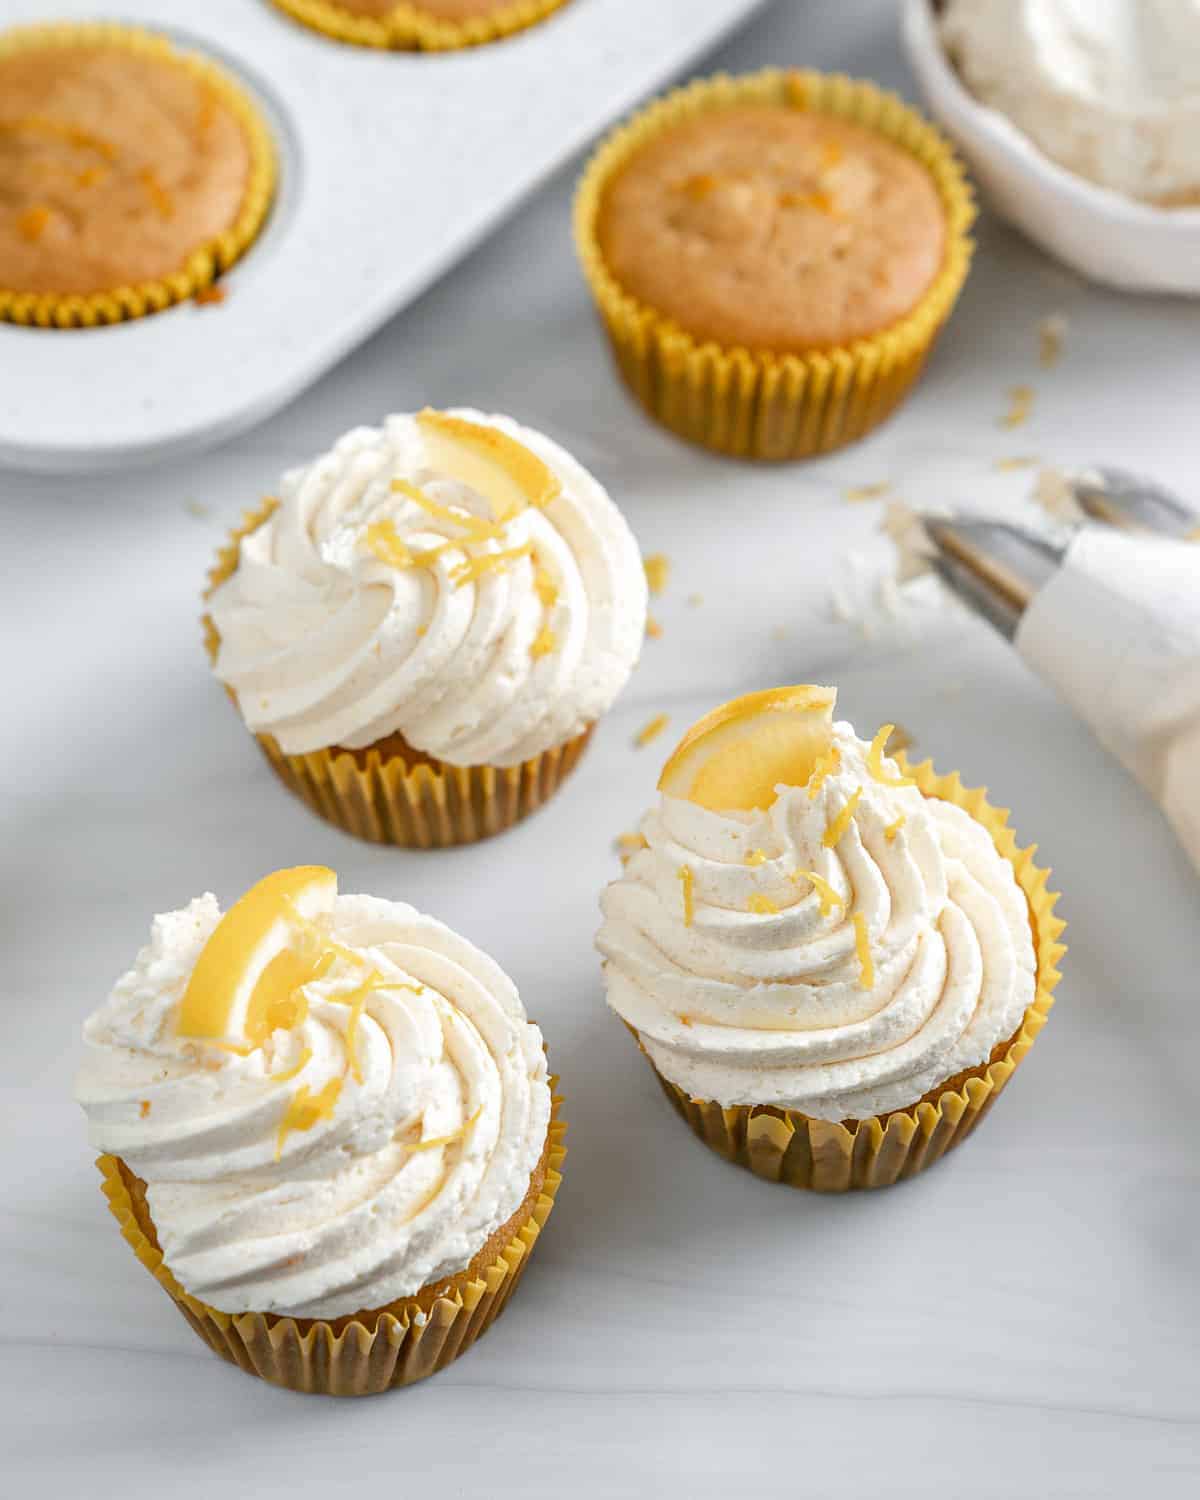 completed lemon vanilla cupcakes on a white surface